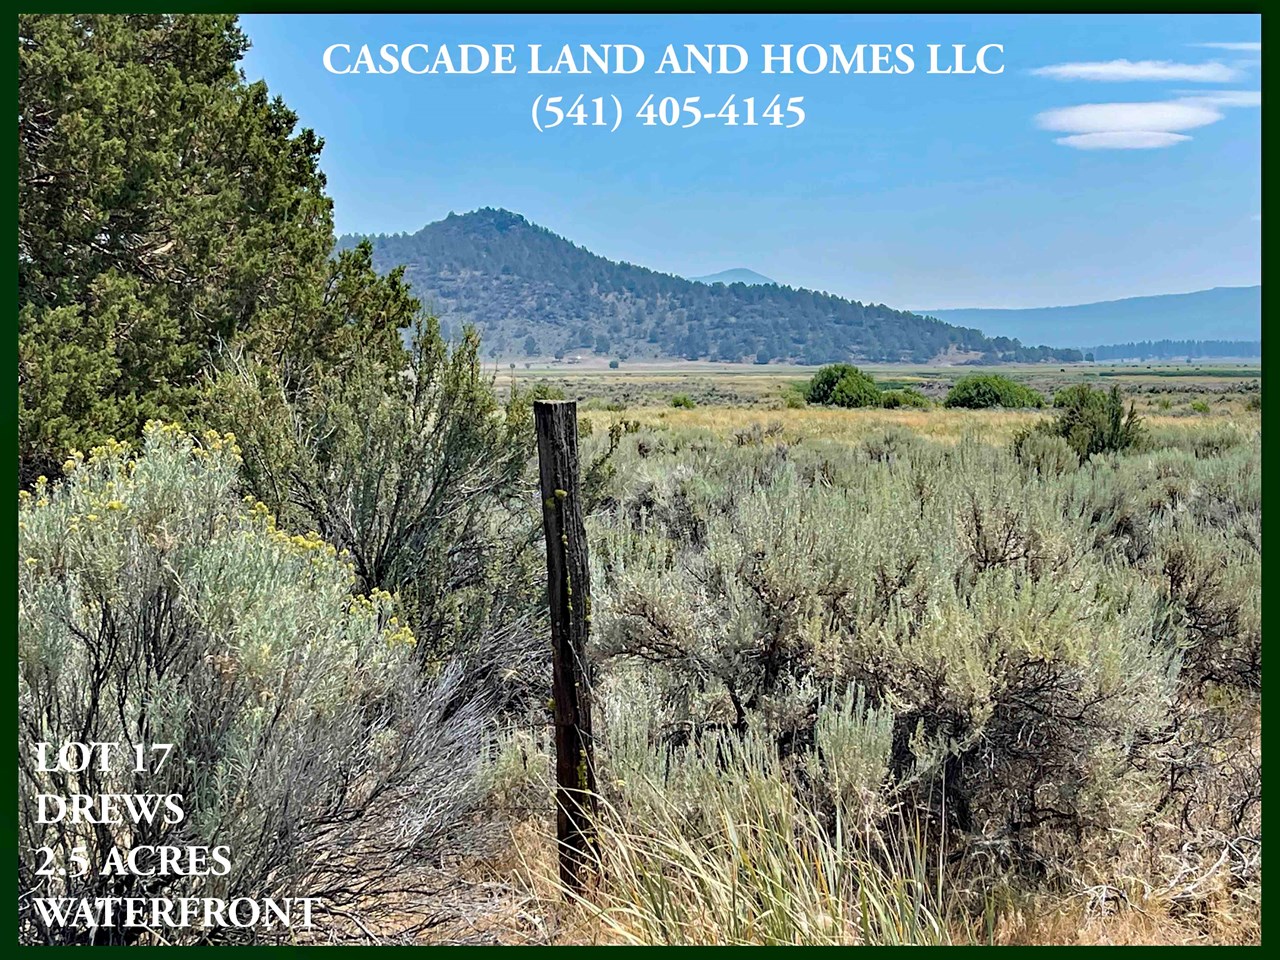 the property has many large trees, mostly juniper. it also has some native vegetation, sage, rabbit brush, and native grasses, which are typical for the landscape here. the area is in the rain shadow of the cascade mountains and is considered high desert.